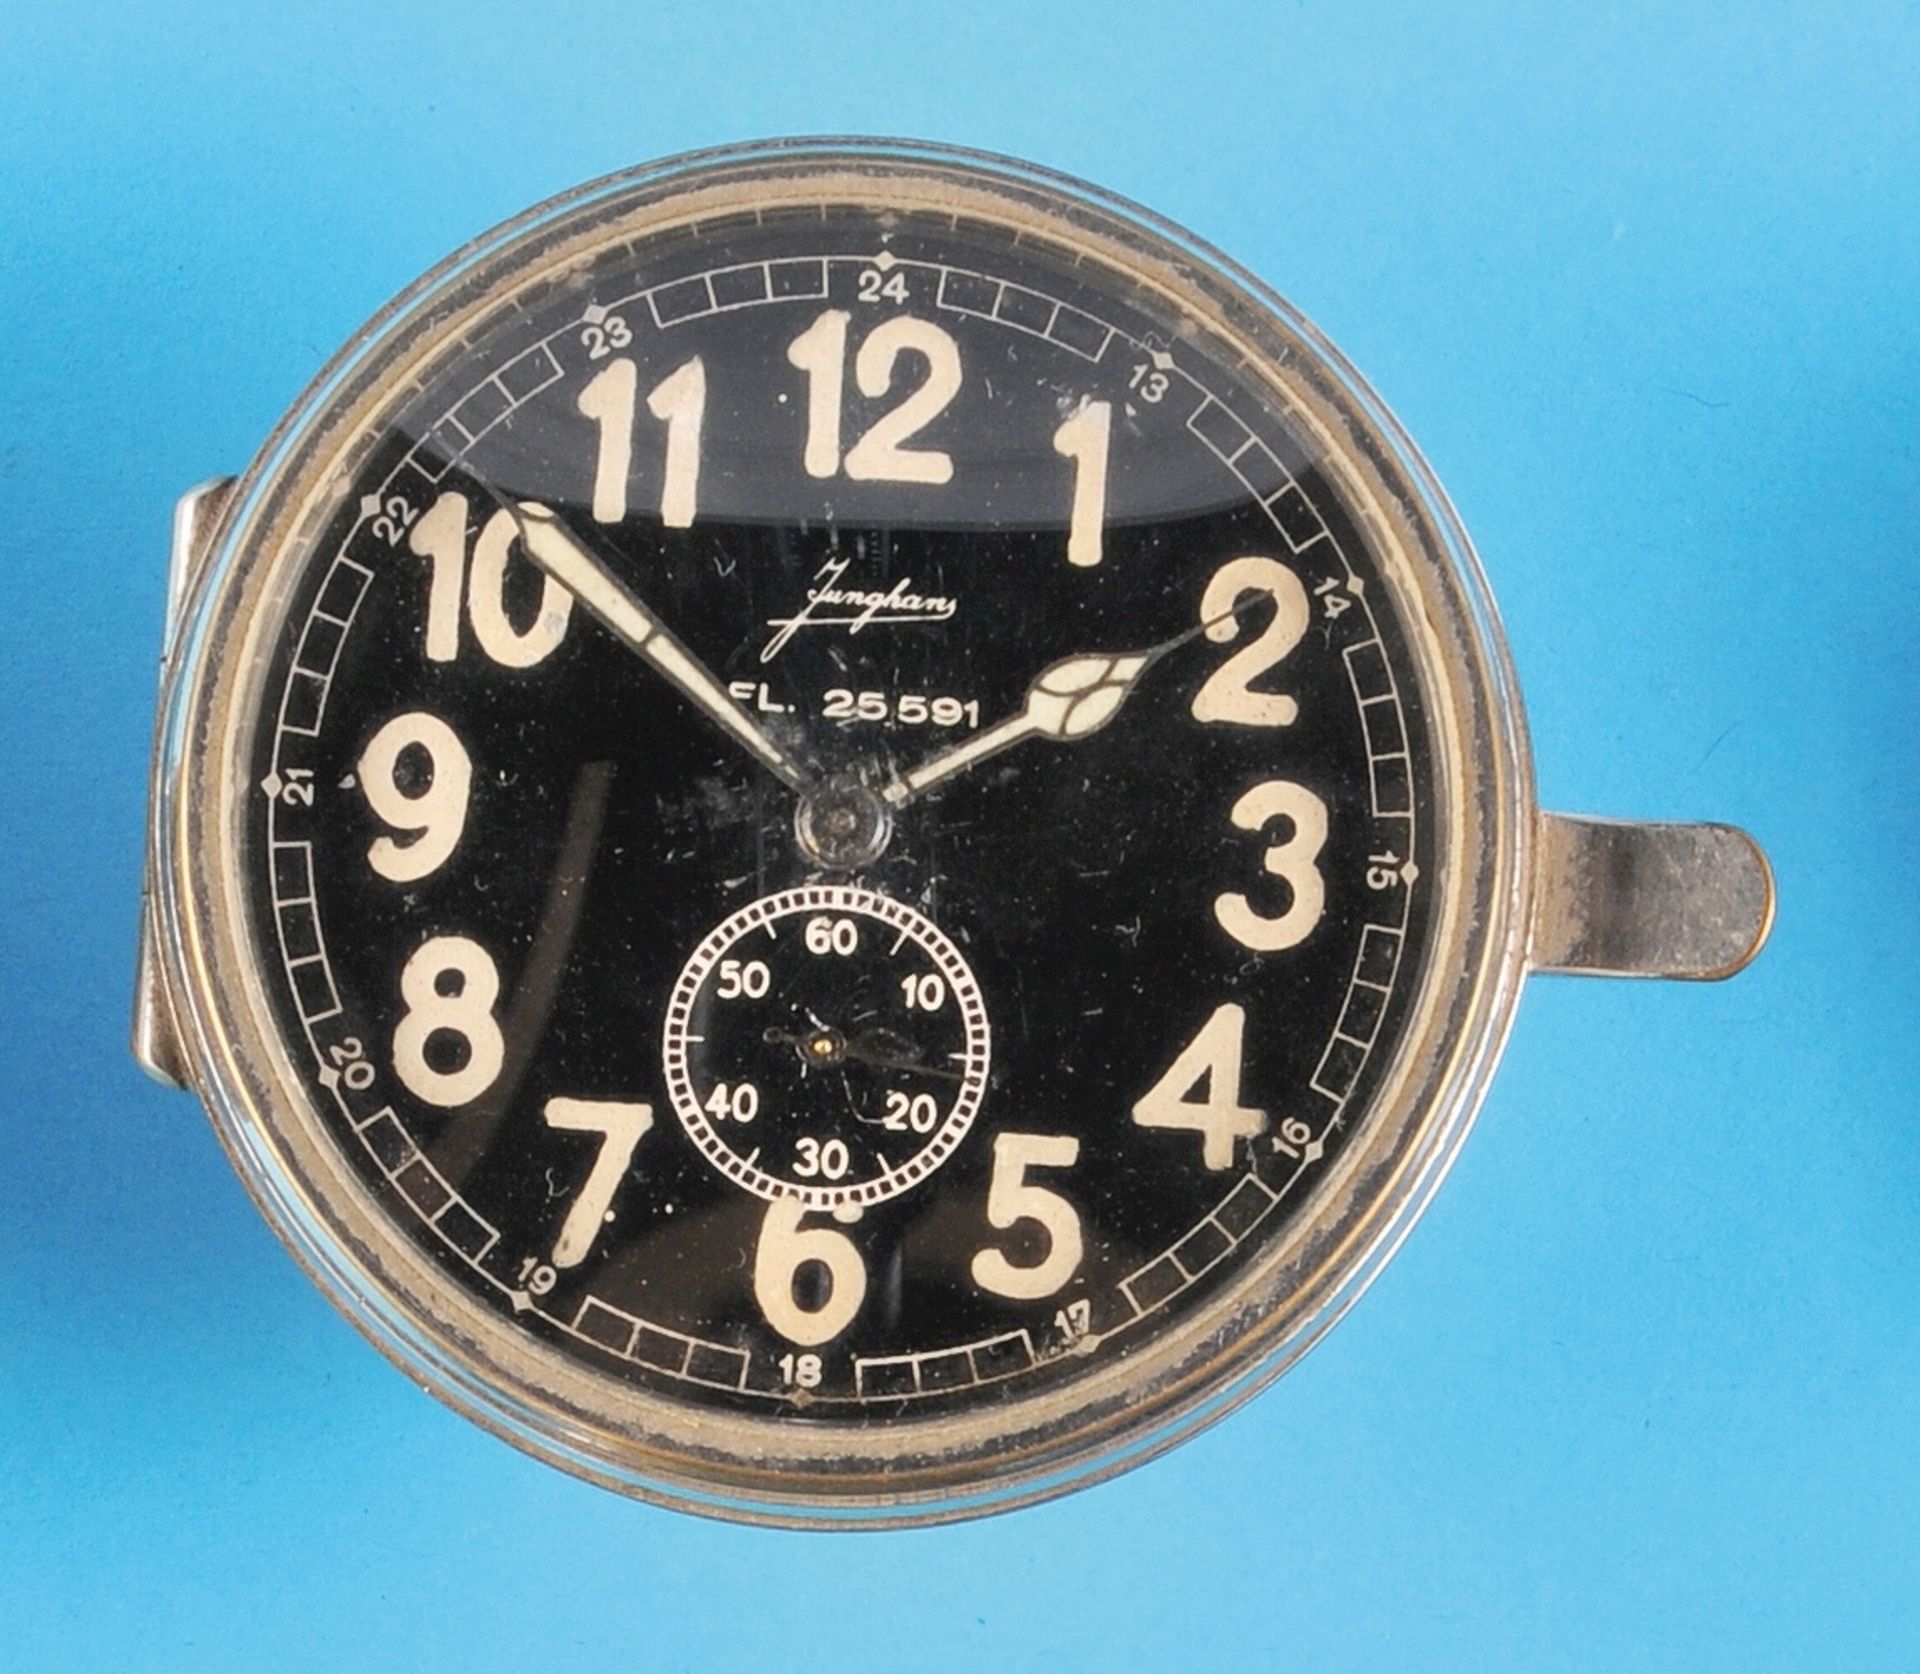 Junghans on-board chronometer "Property of the Air Force", Fl. 25591, Junghans 1937, 